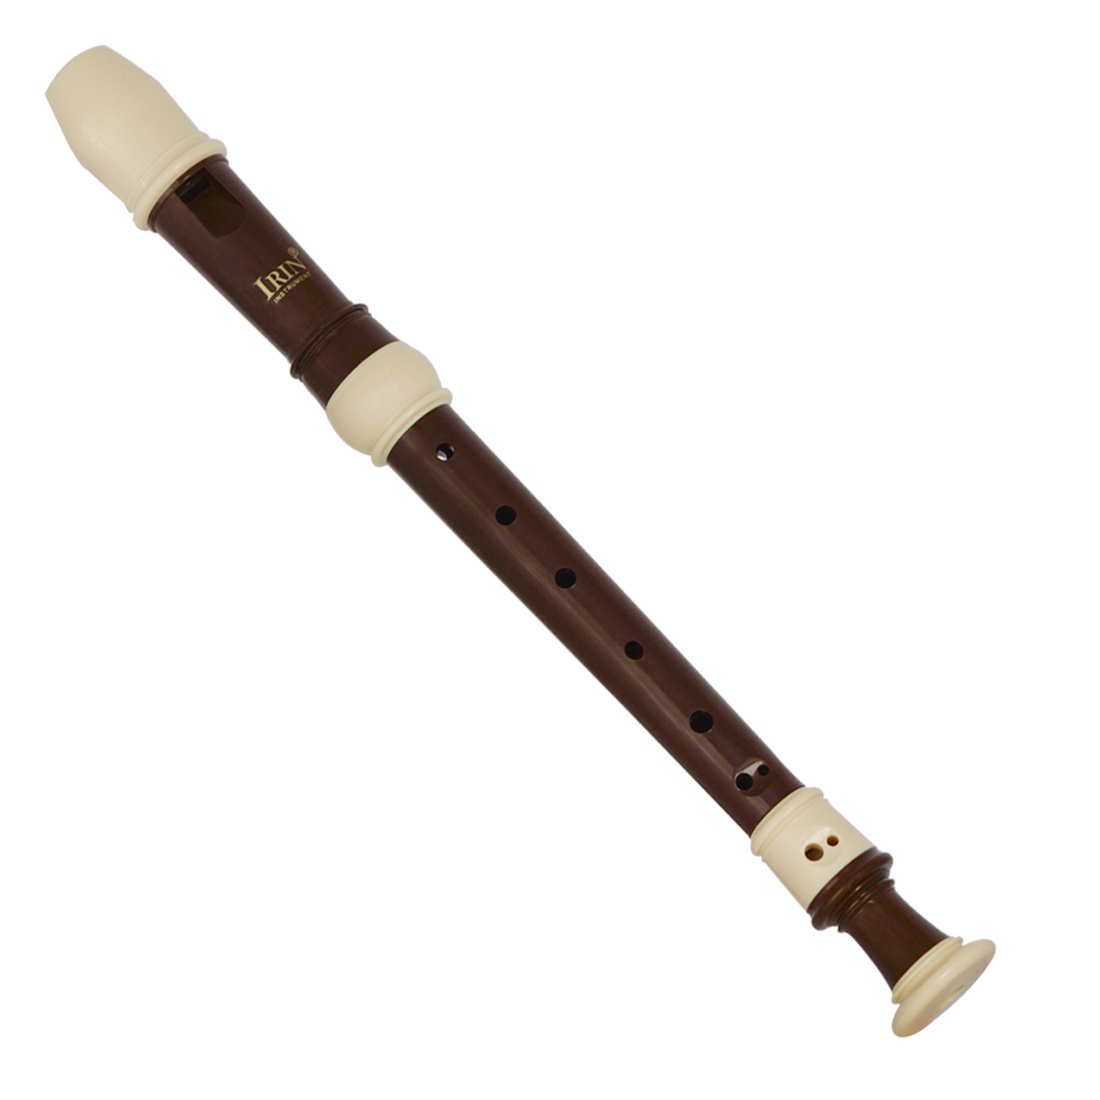 Soprano - Overview - Recorders - Brass & Woodwinds - Musical Instruments -  Products - Yamaha USA